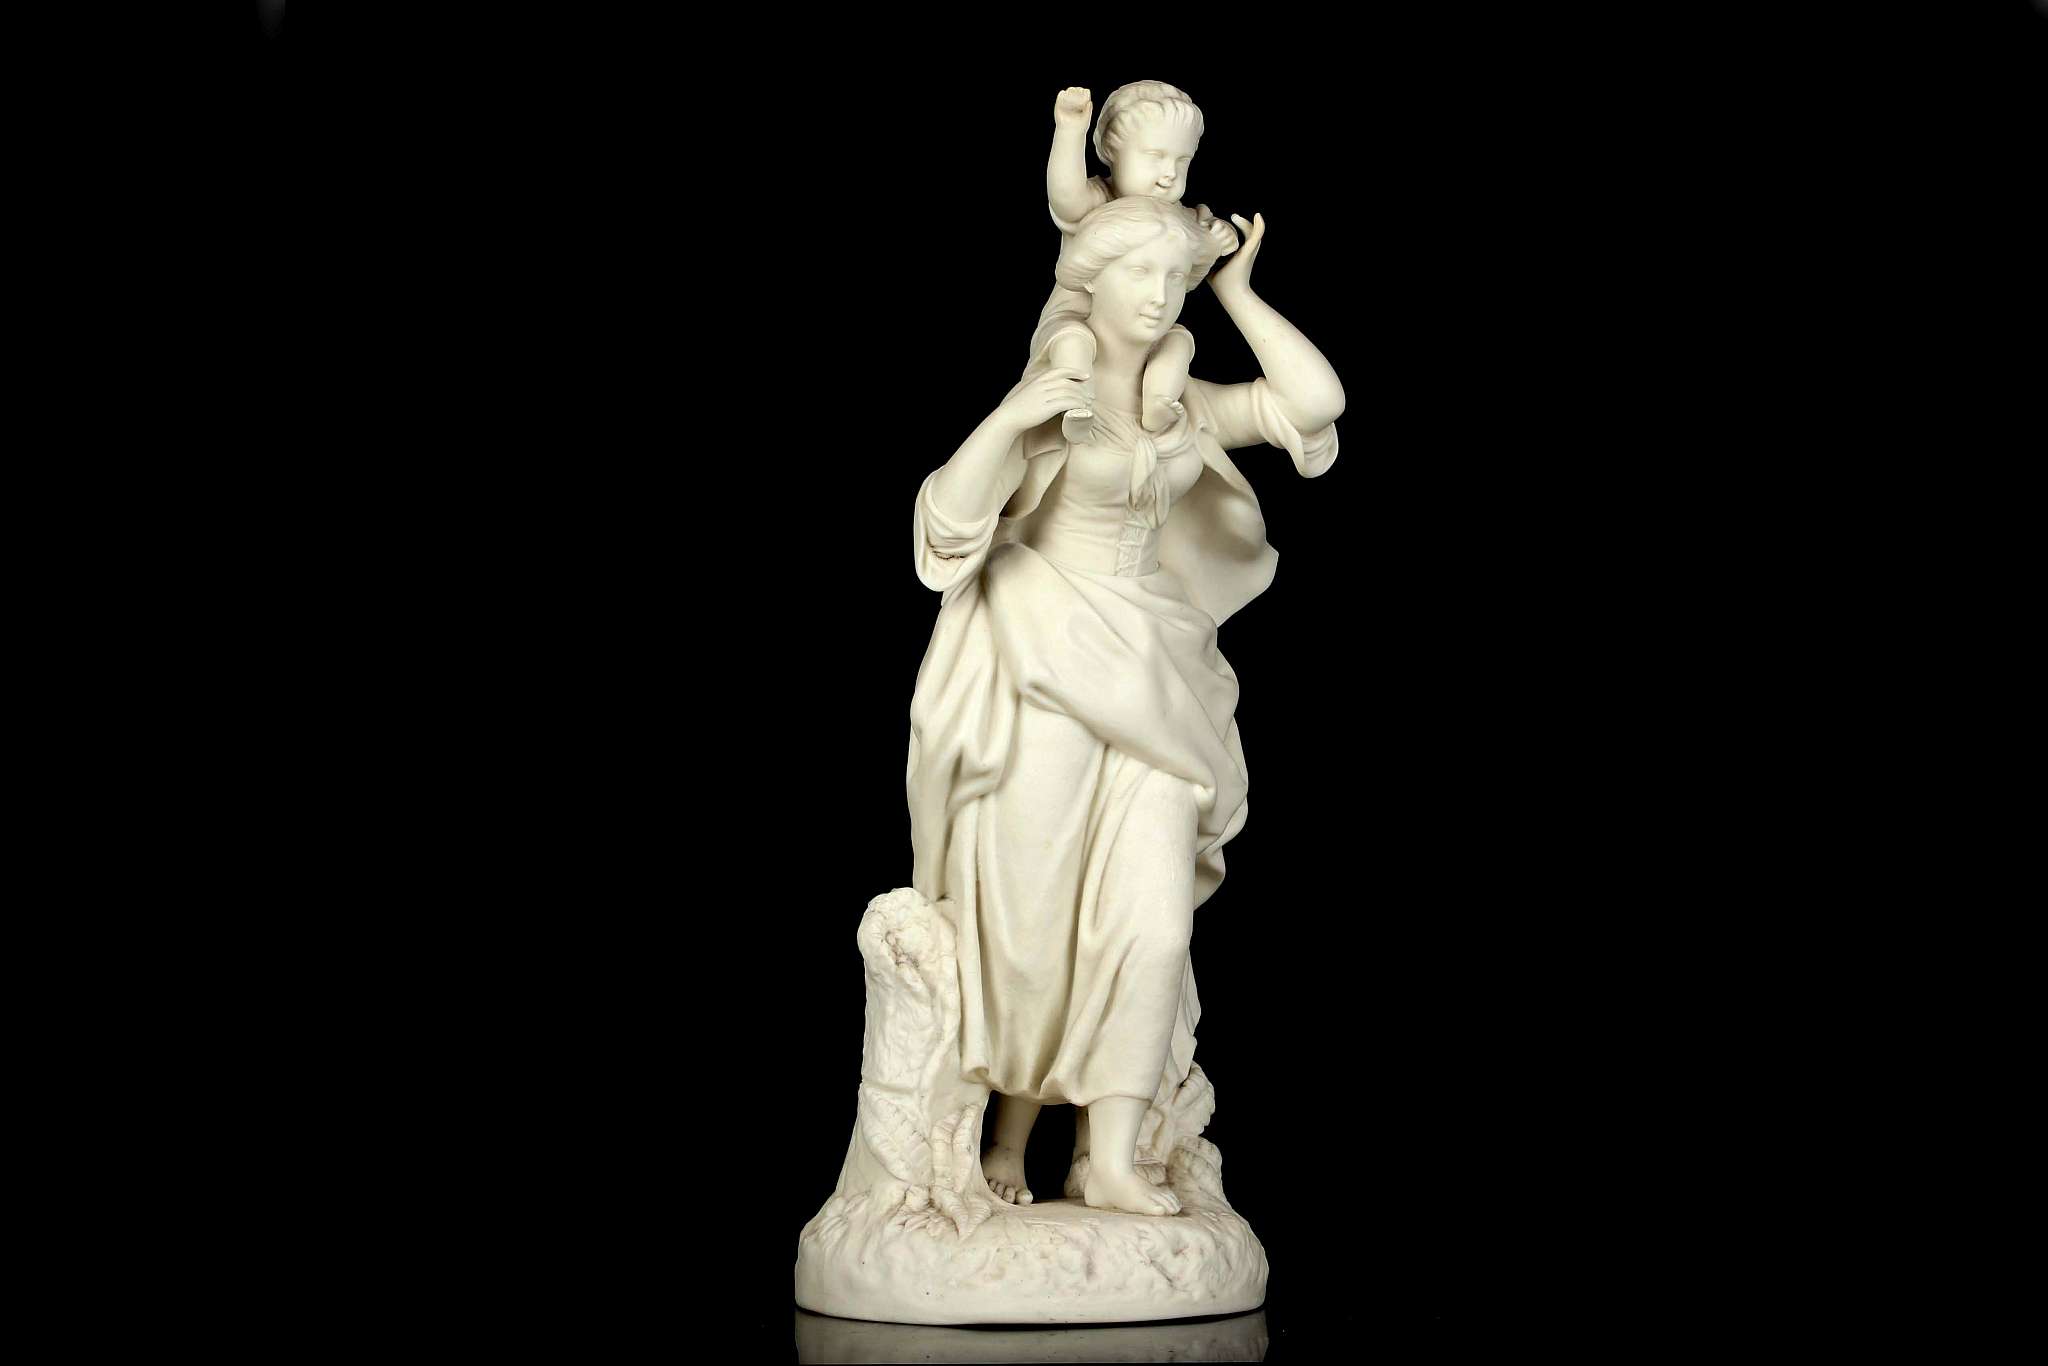 AN 'ART UNION OF GREAT BRITAIN' PARIAN FIGURE, late 19th century, modelled as a corseted woman